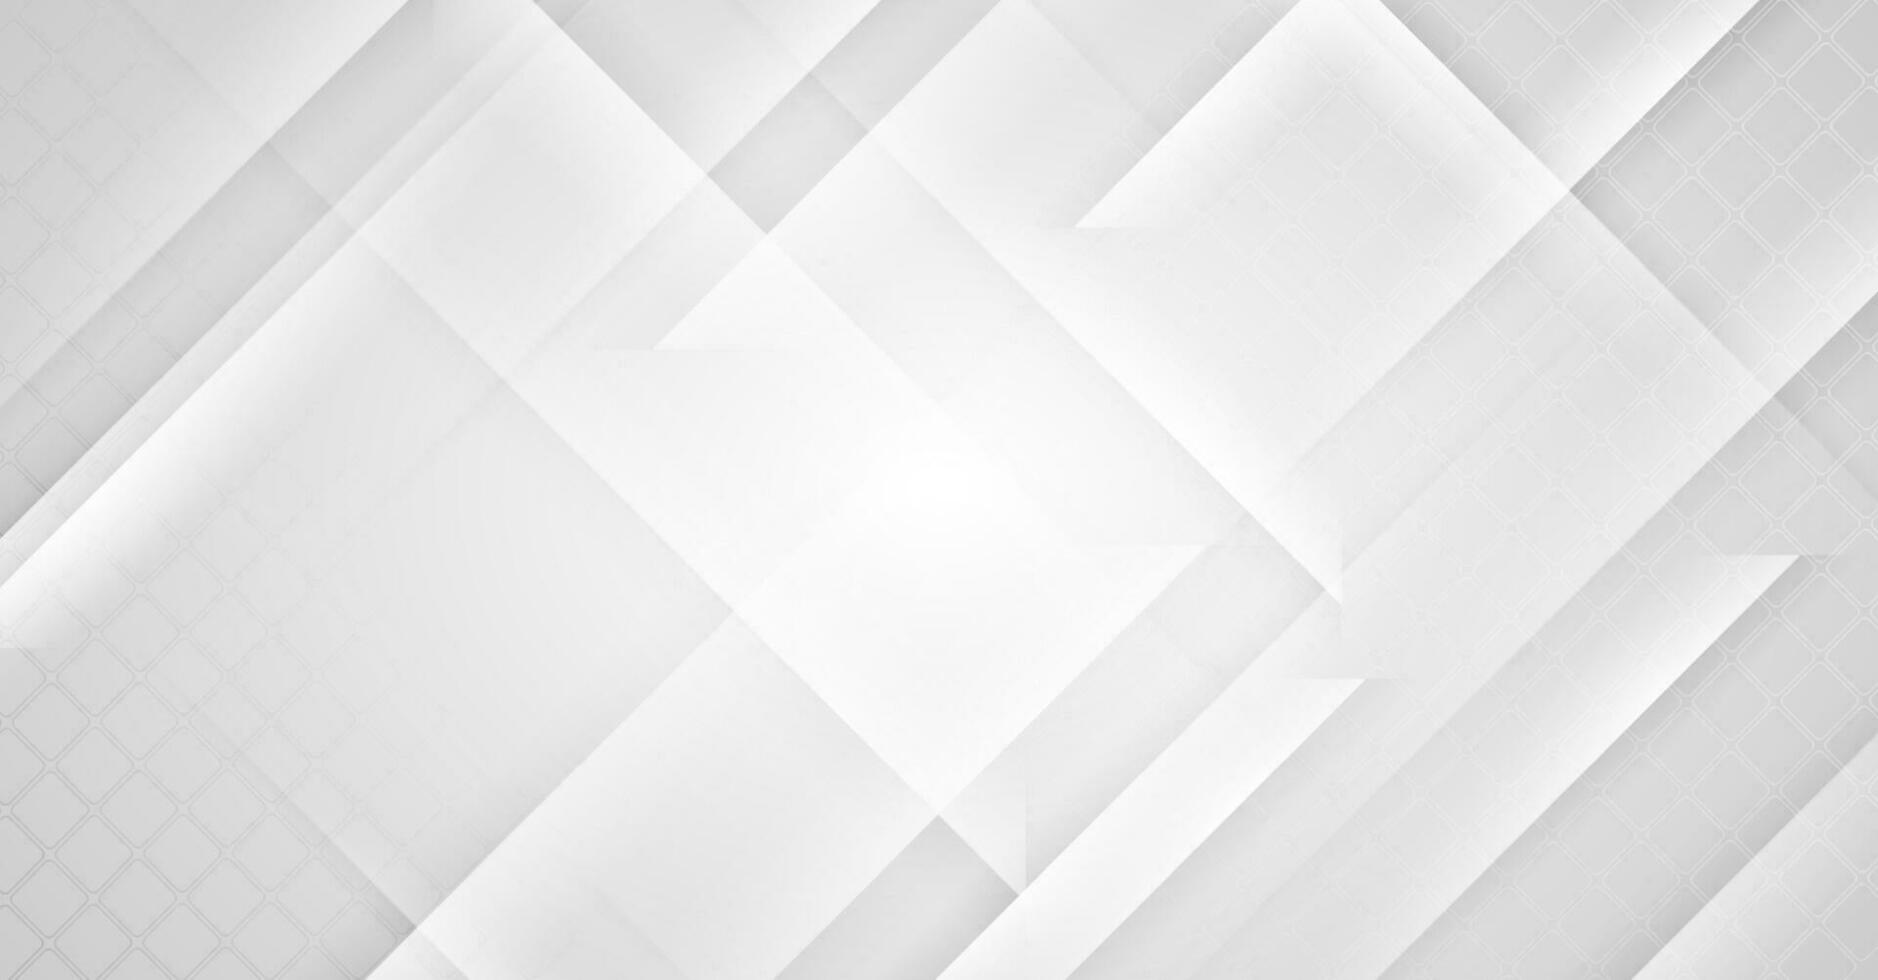 Grey tech geometric abstract minimal background vector